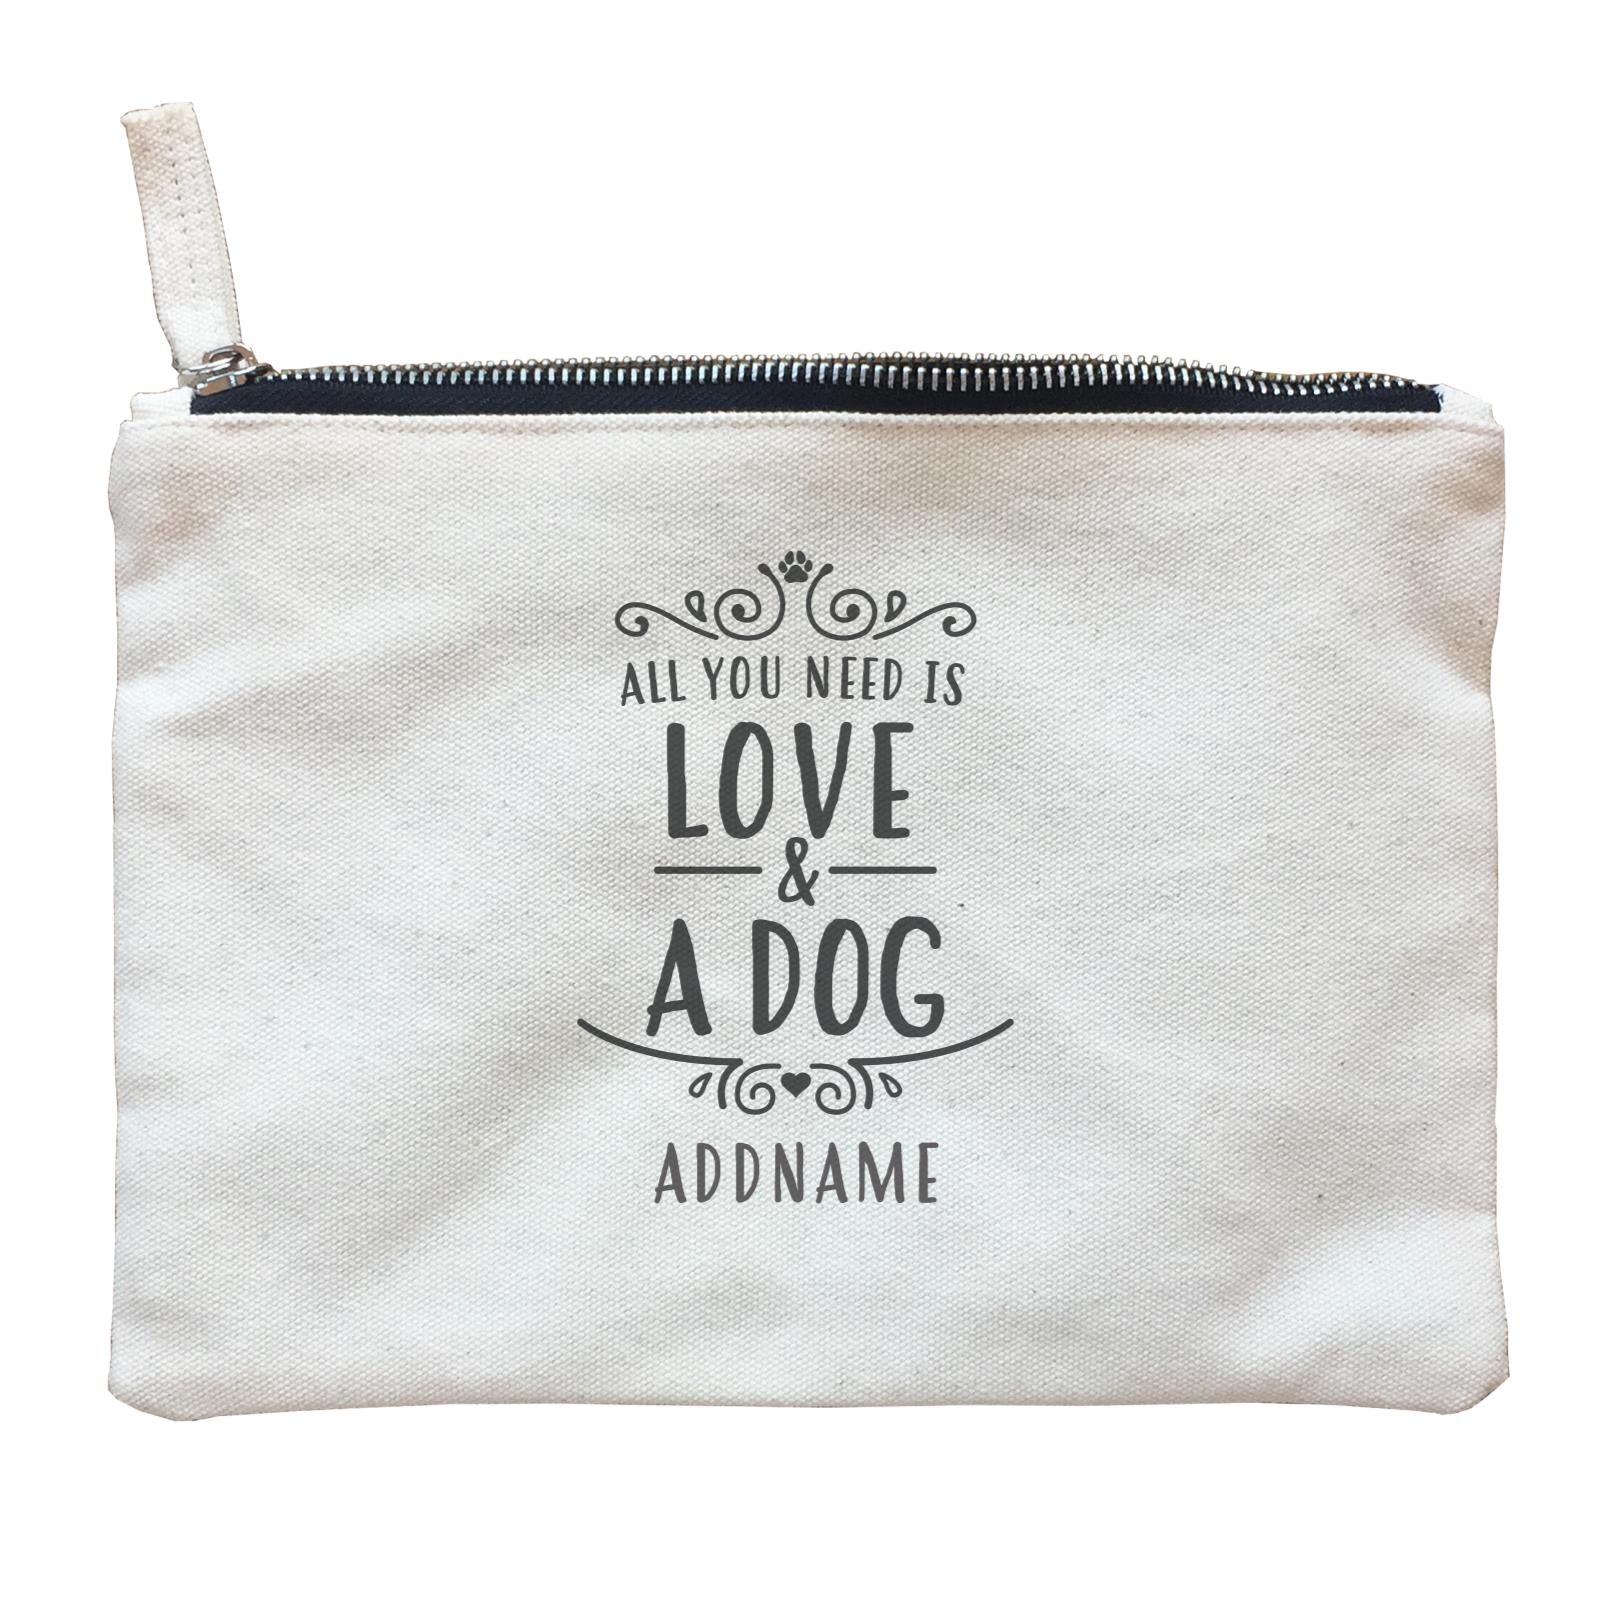 Random Quotes All You Need Is Love And A Dog Addname Zipper Pouch